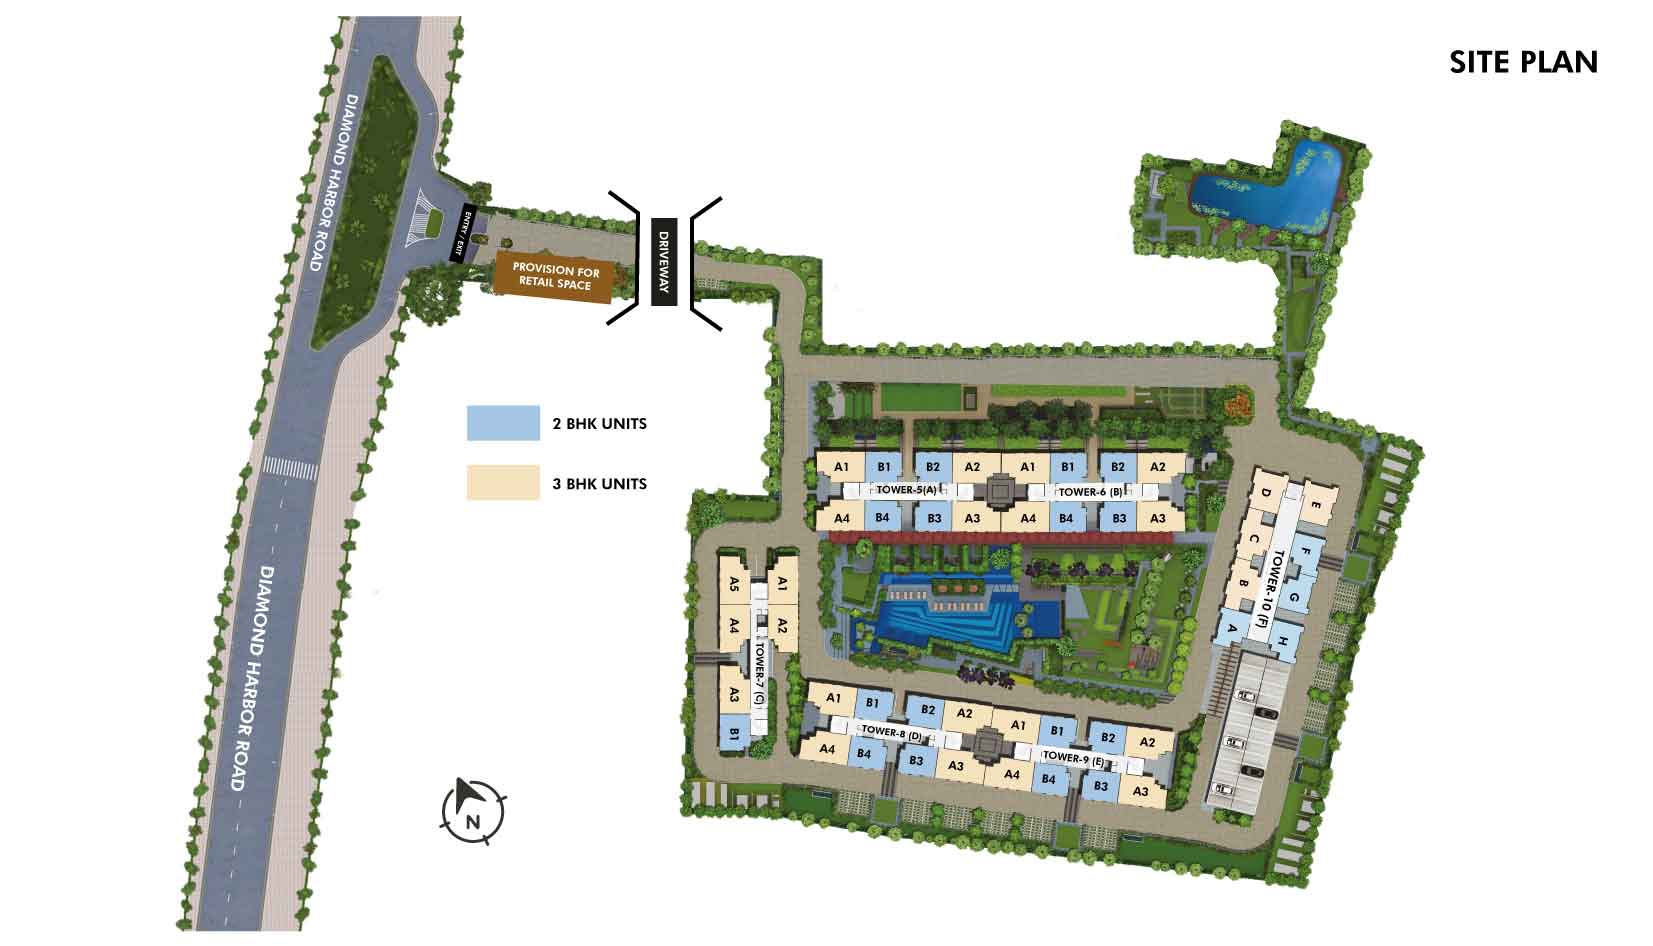 The 102 Site Plan